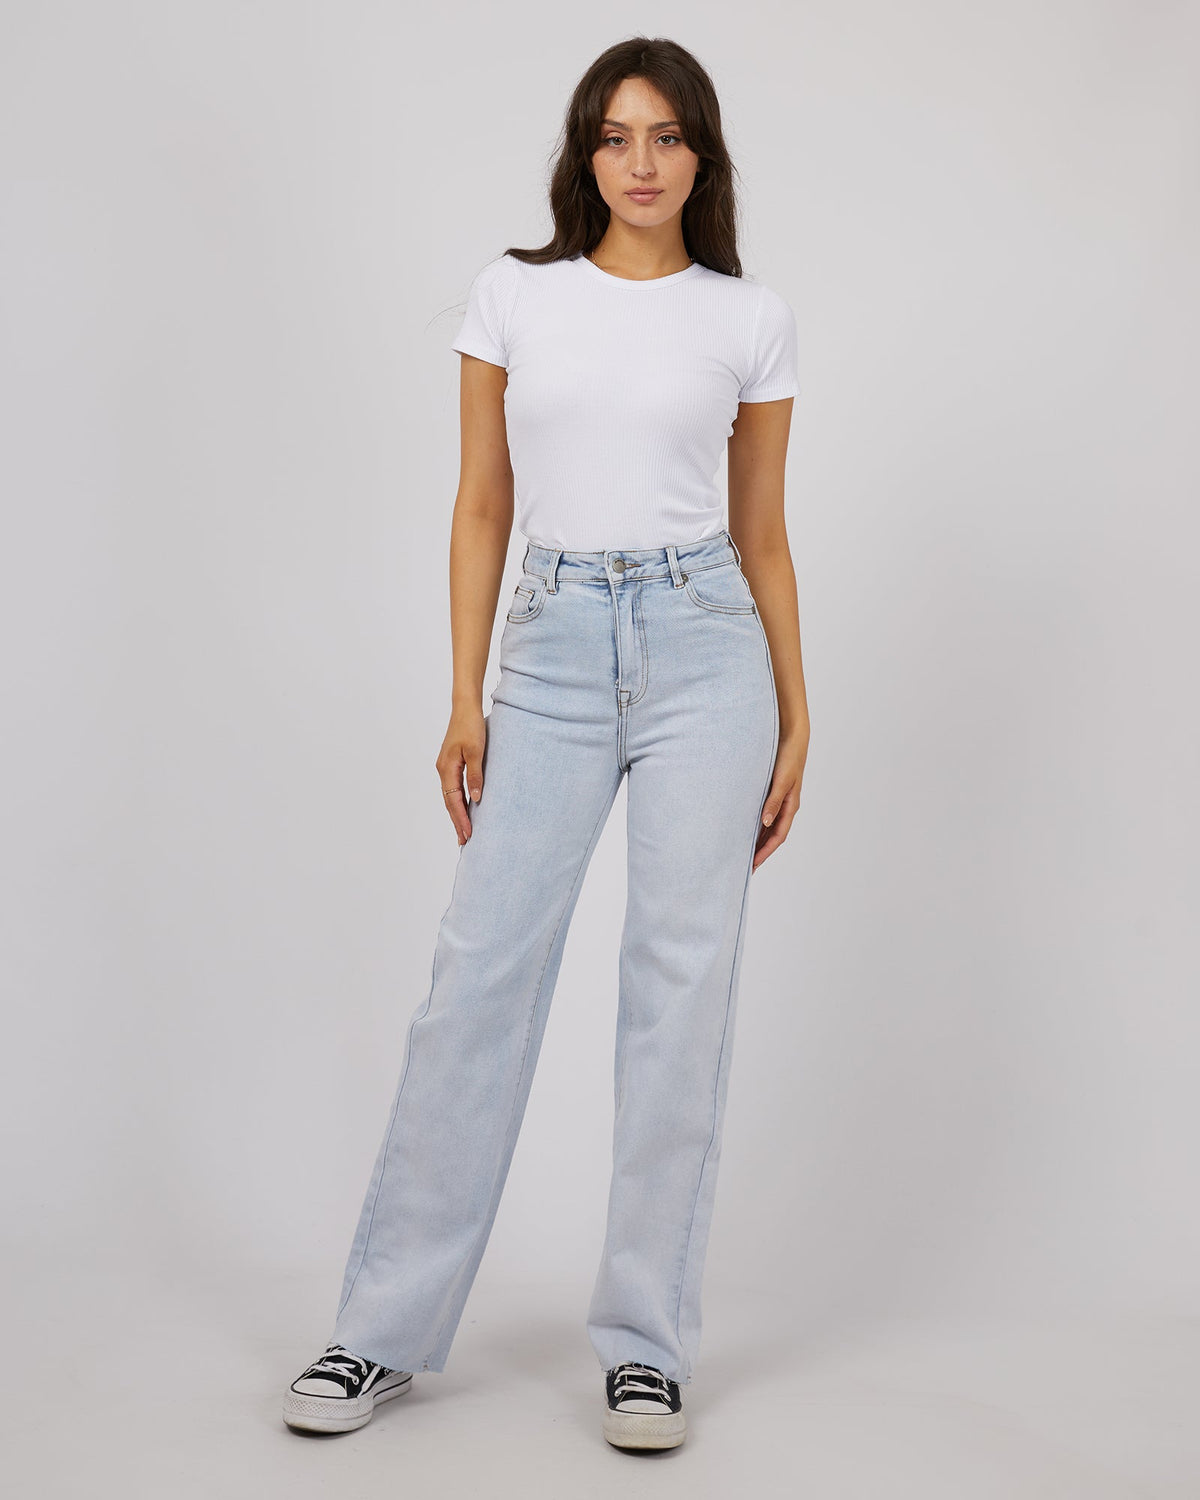 All About Eve-Skye Comfort Jean Light Blue-Edge Clothing